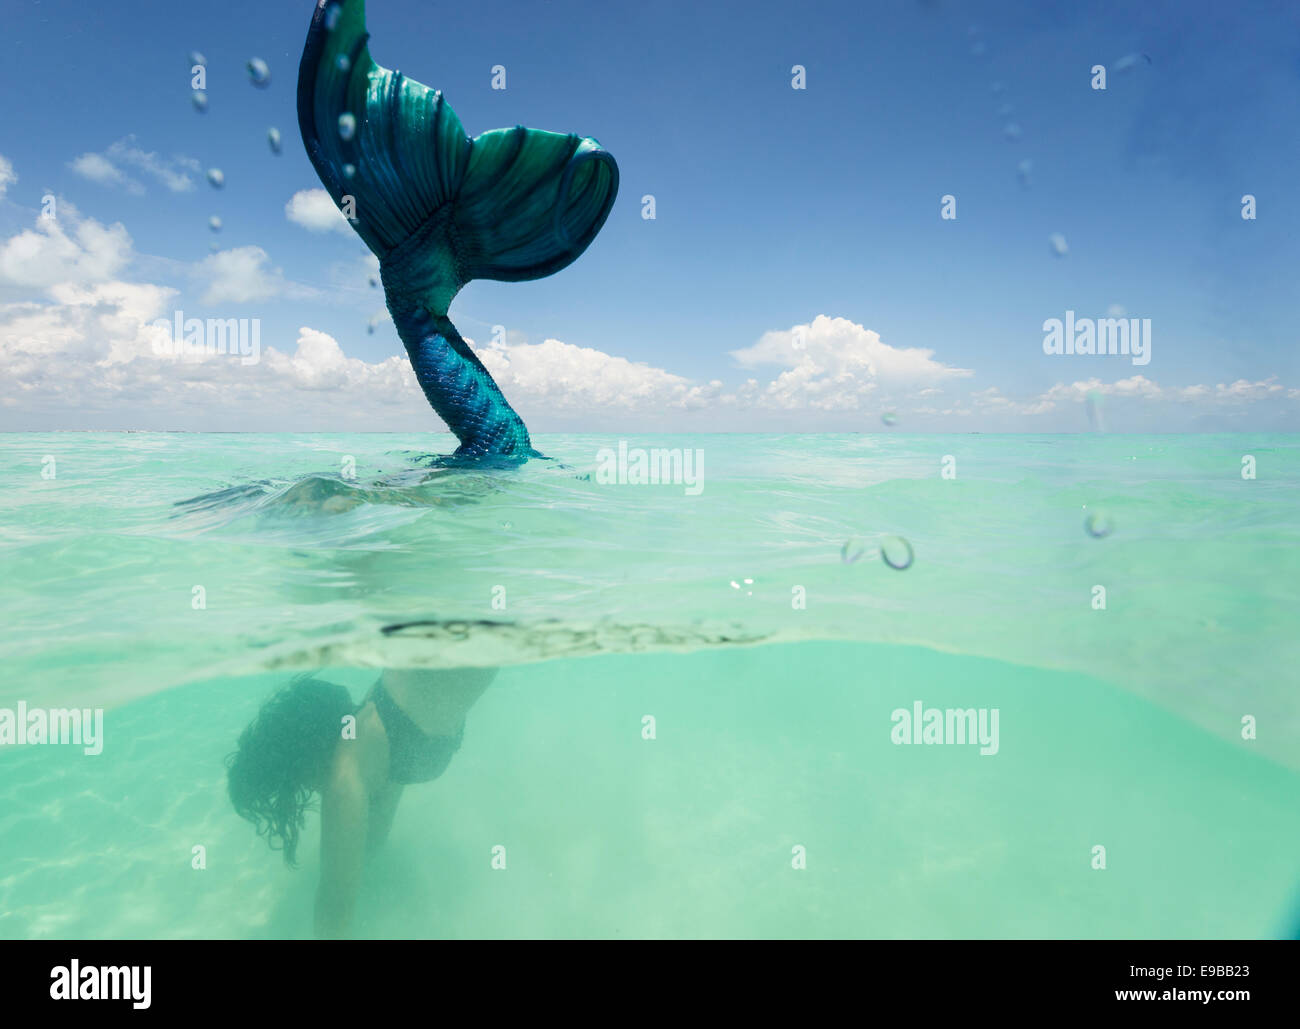 Mermaid raising her fluke into the air in the waters off Isla Mujeres, Mexico Stock Photo